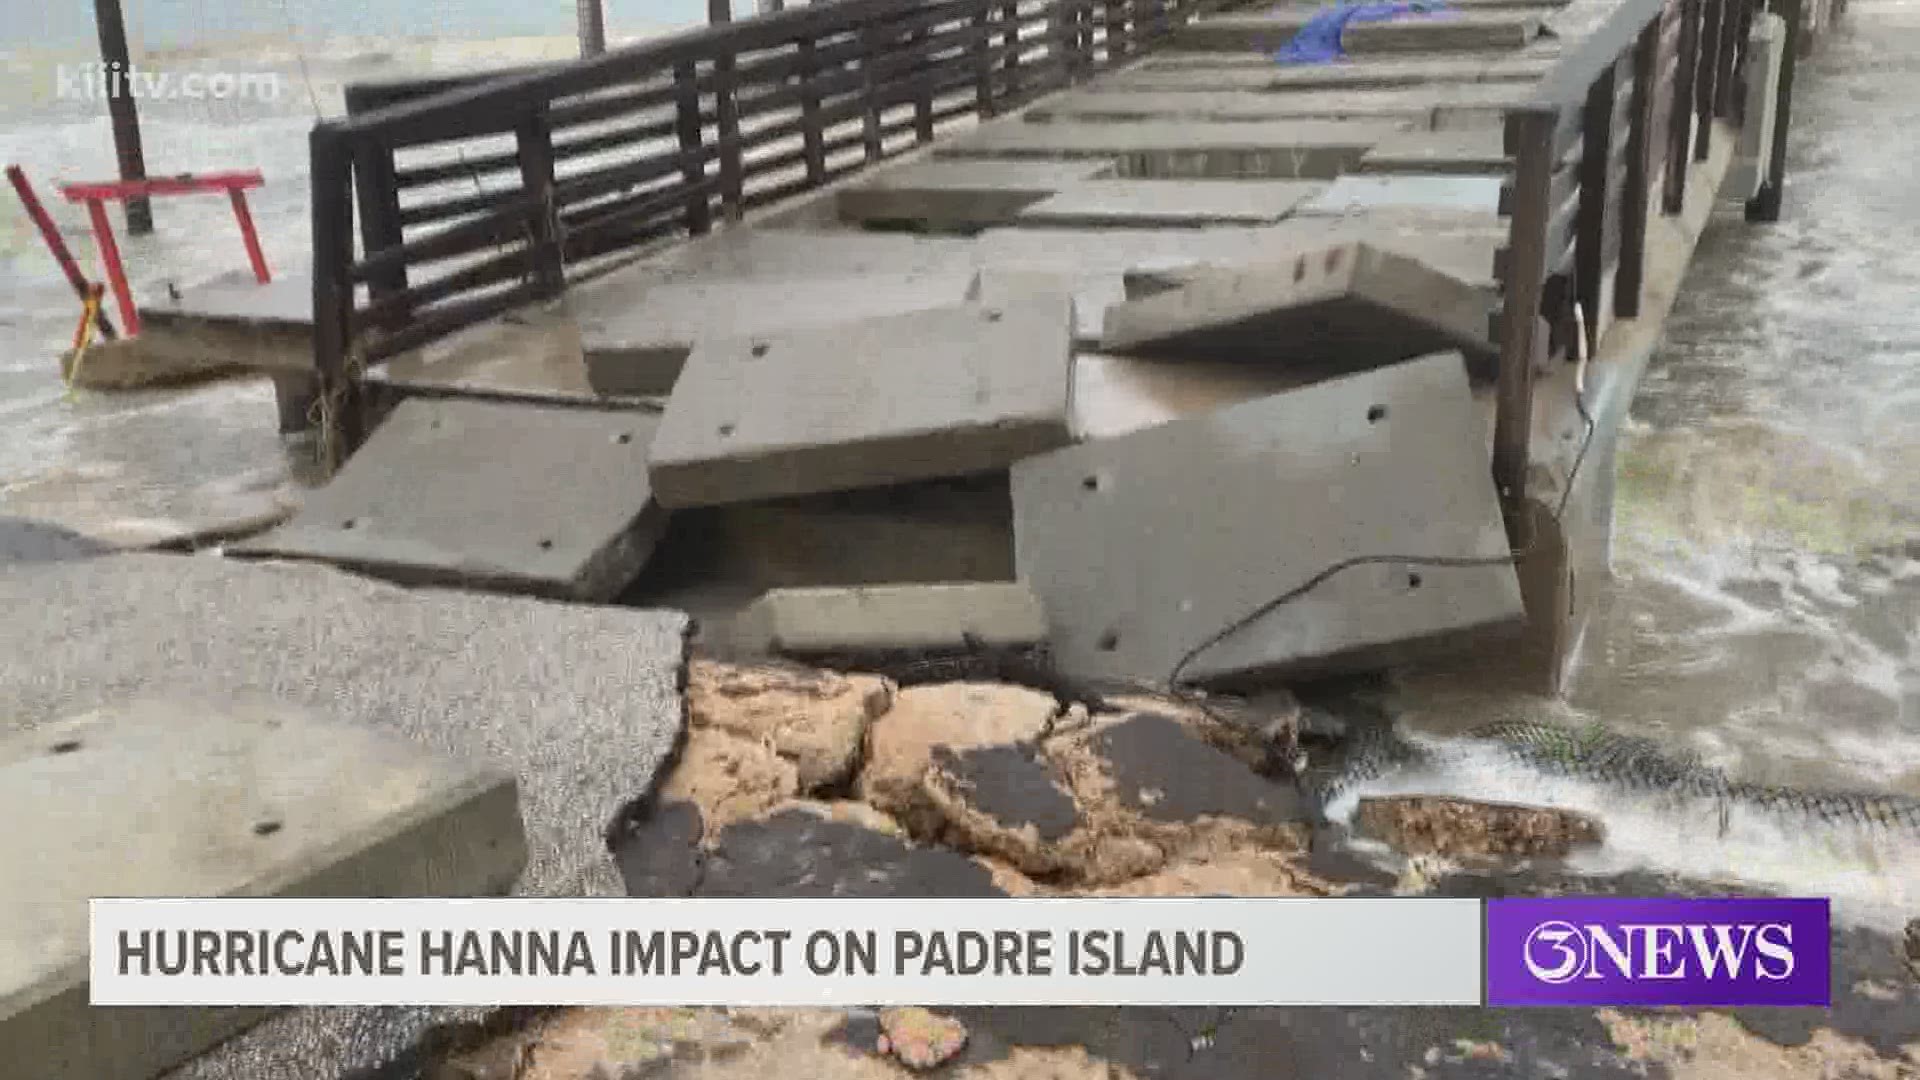 3 News reporter Michael Gibson reports on the damage on Padre Island after Hurricane Hanna.